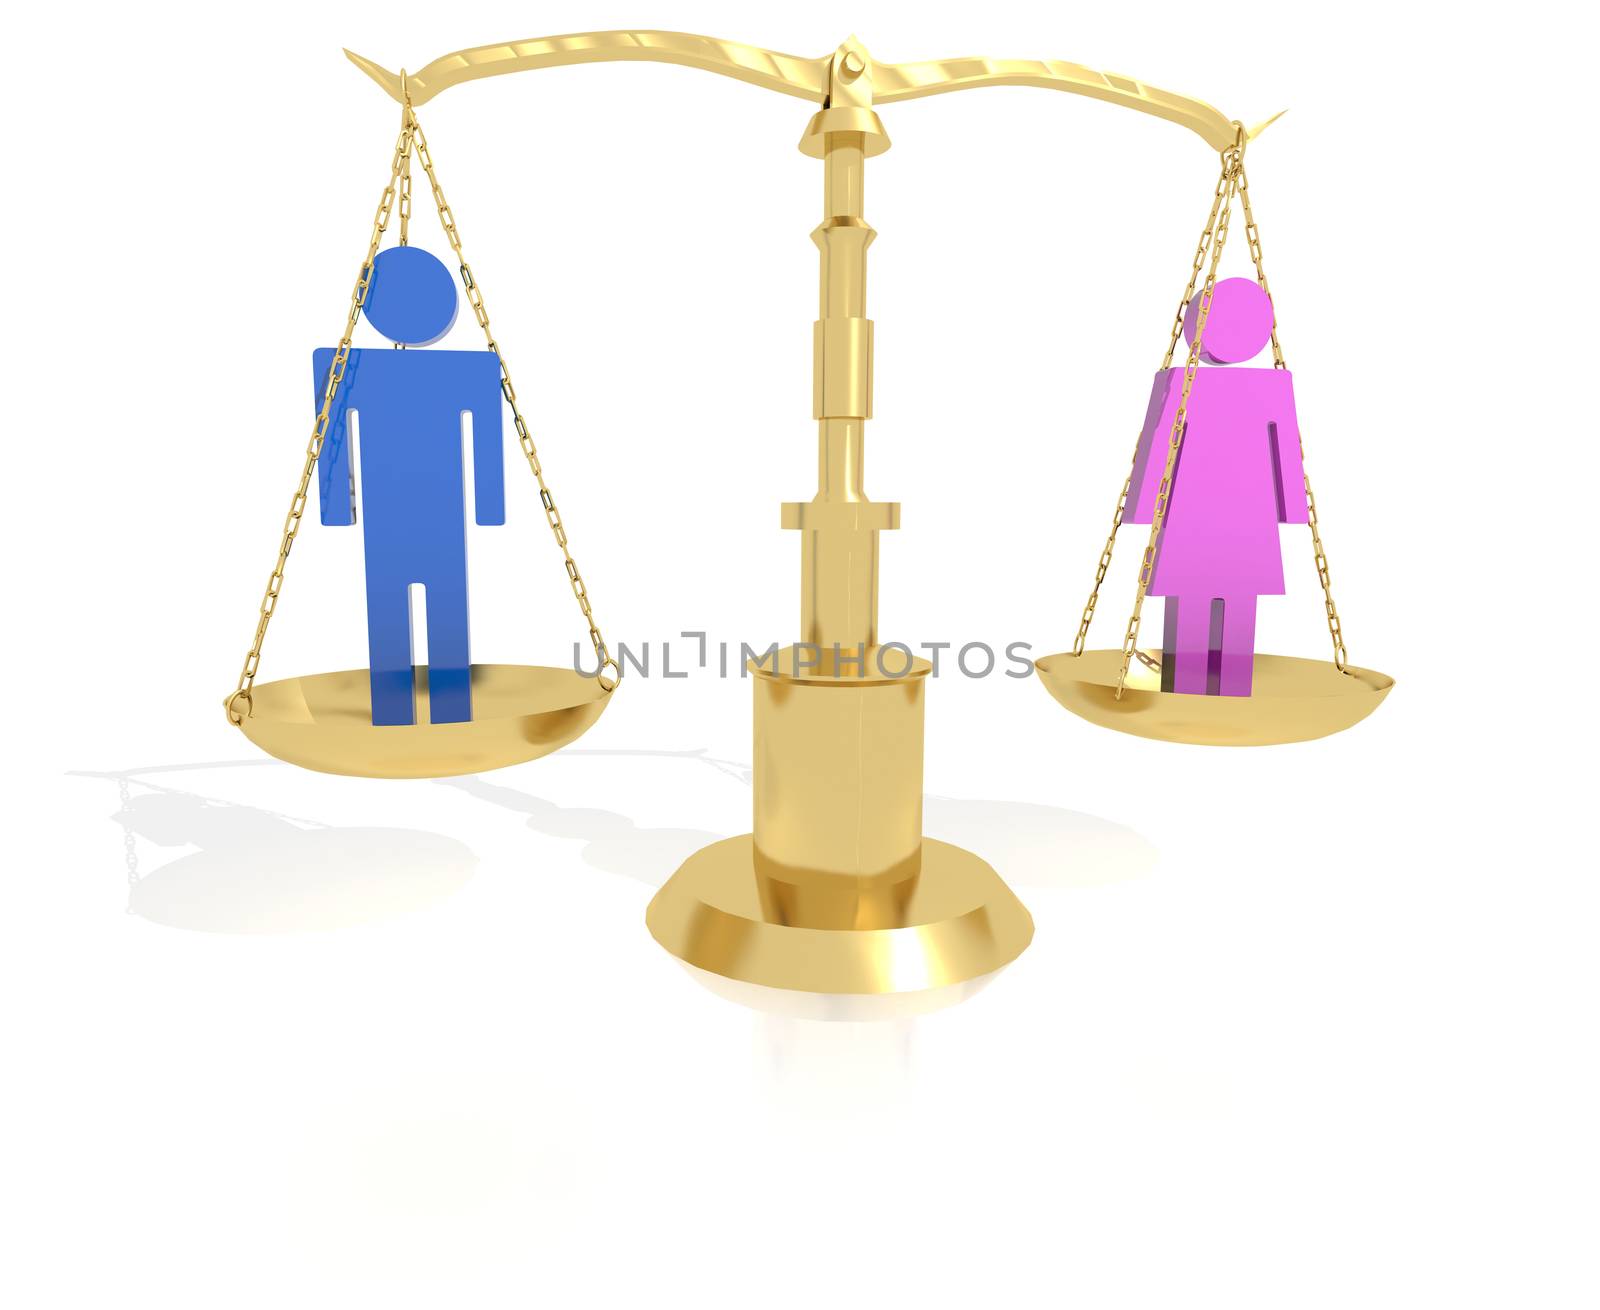 Man - Woman Equality by hyrons